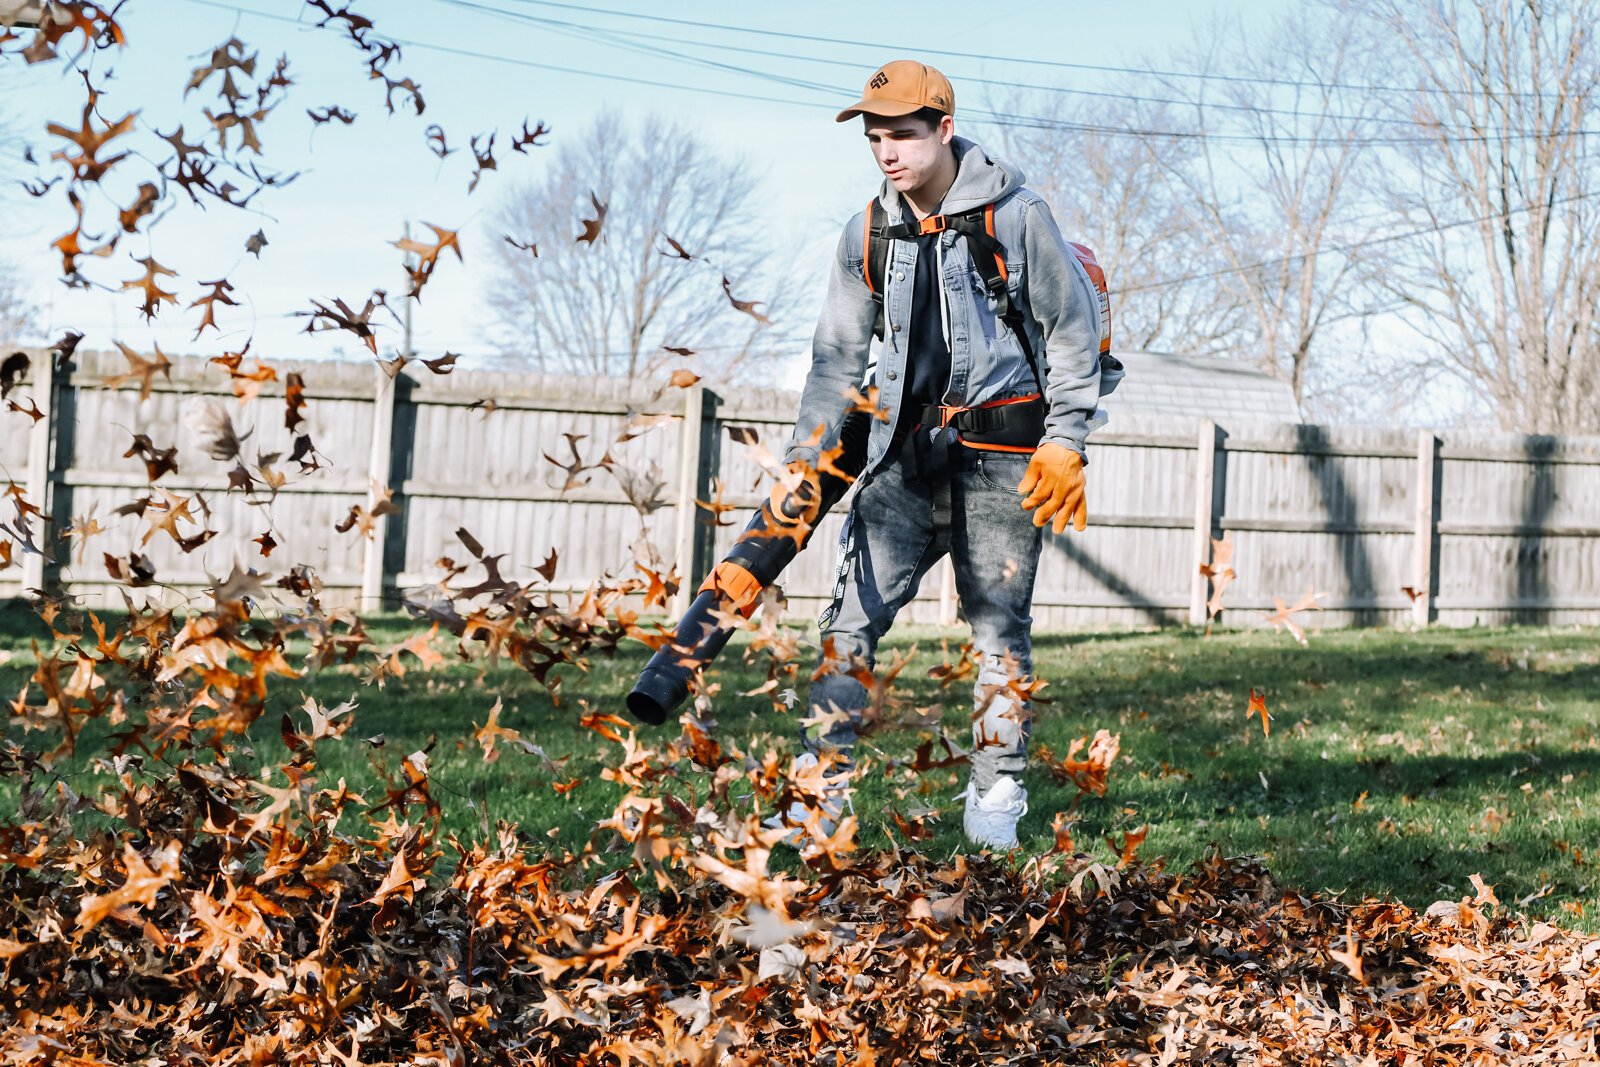 A volunteer with NeighborLink, Elijah Wood, 17, helps clear leaves with a leaf blower at a home in Fort Wayne.